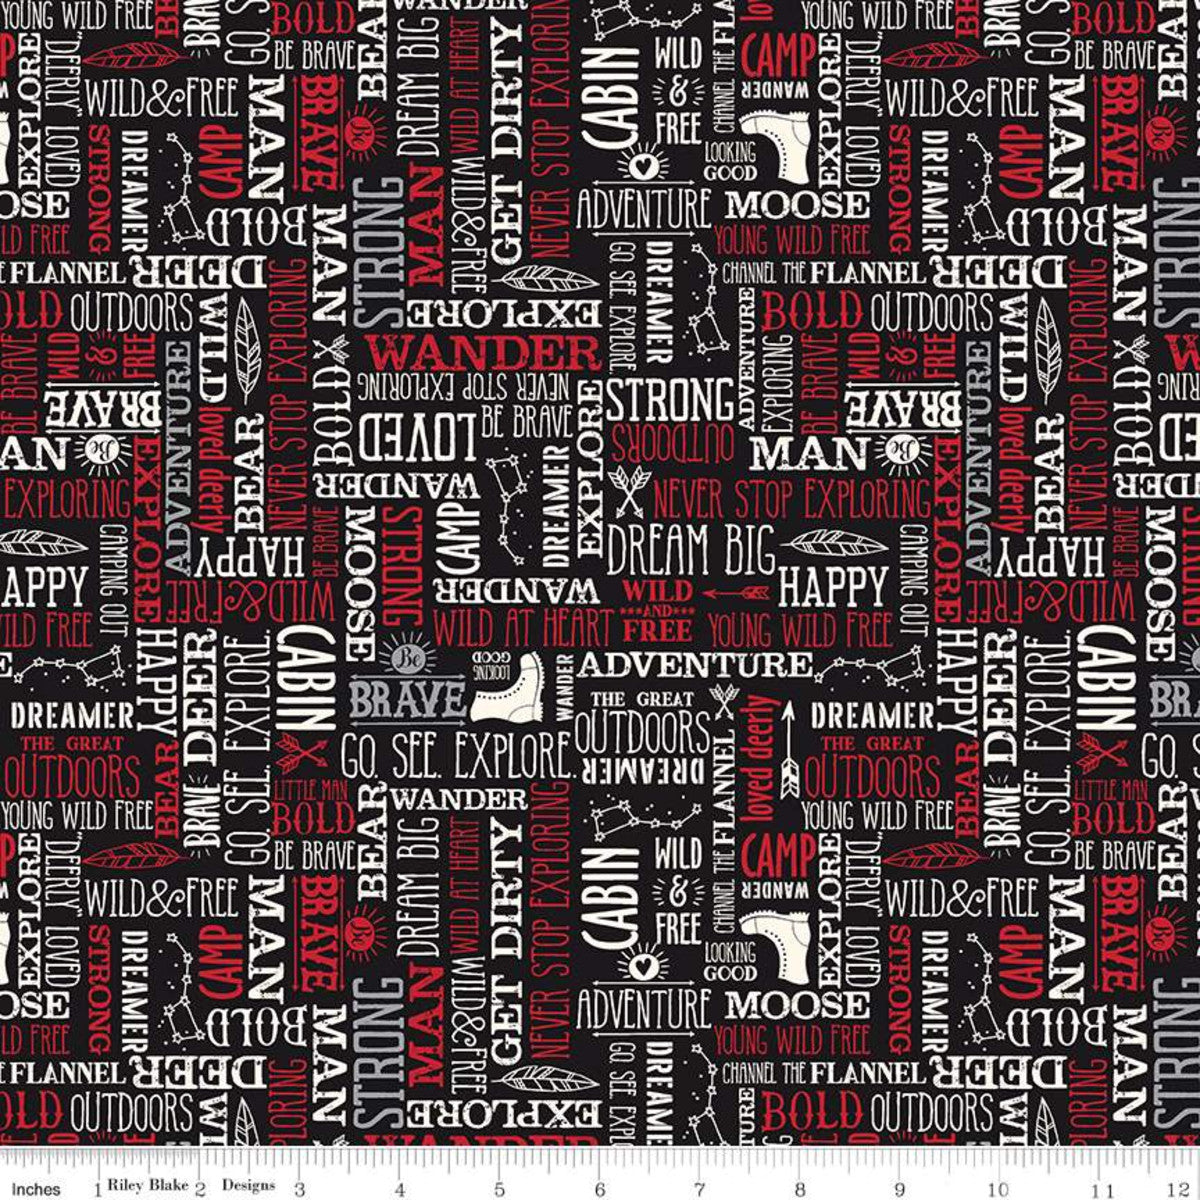 Wild At Heart - Words Fabric - Trapunto